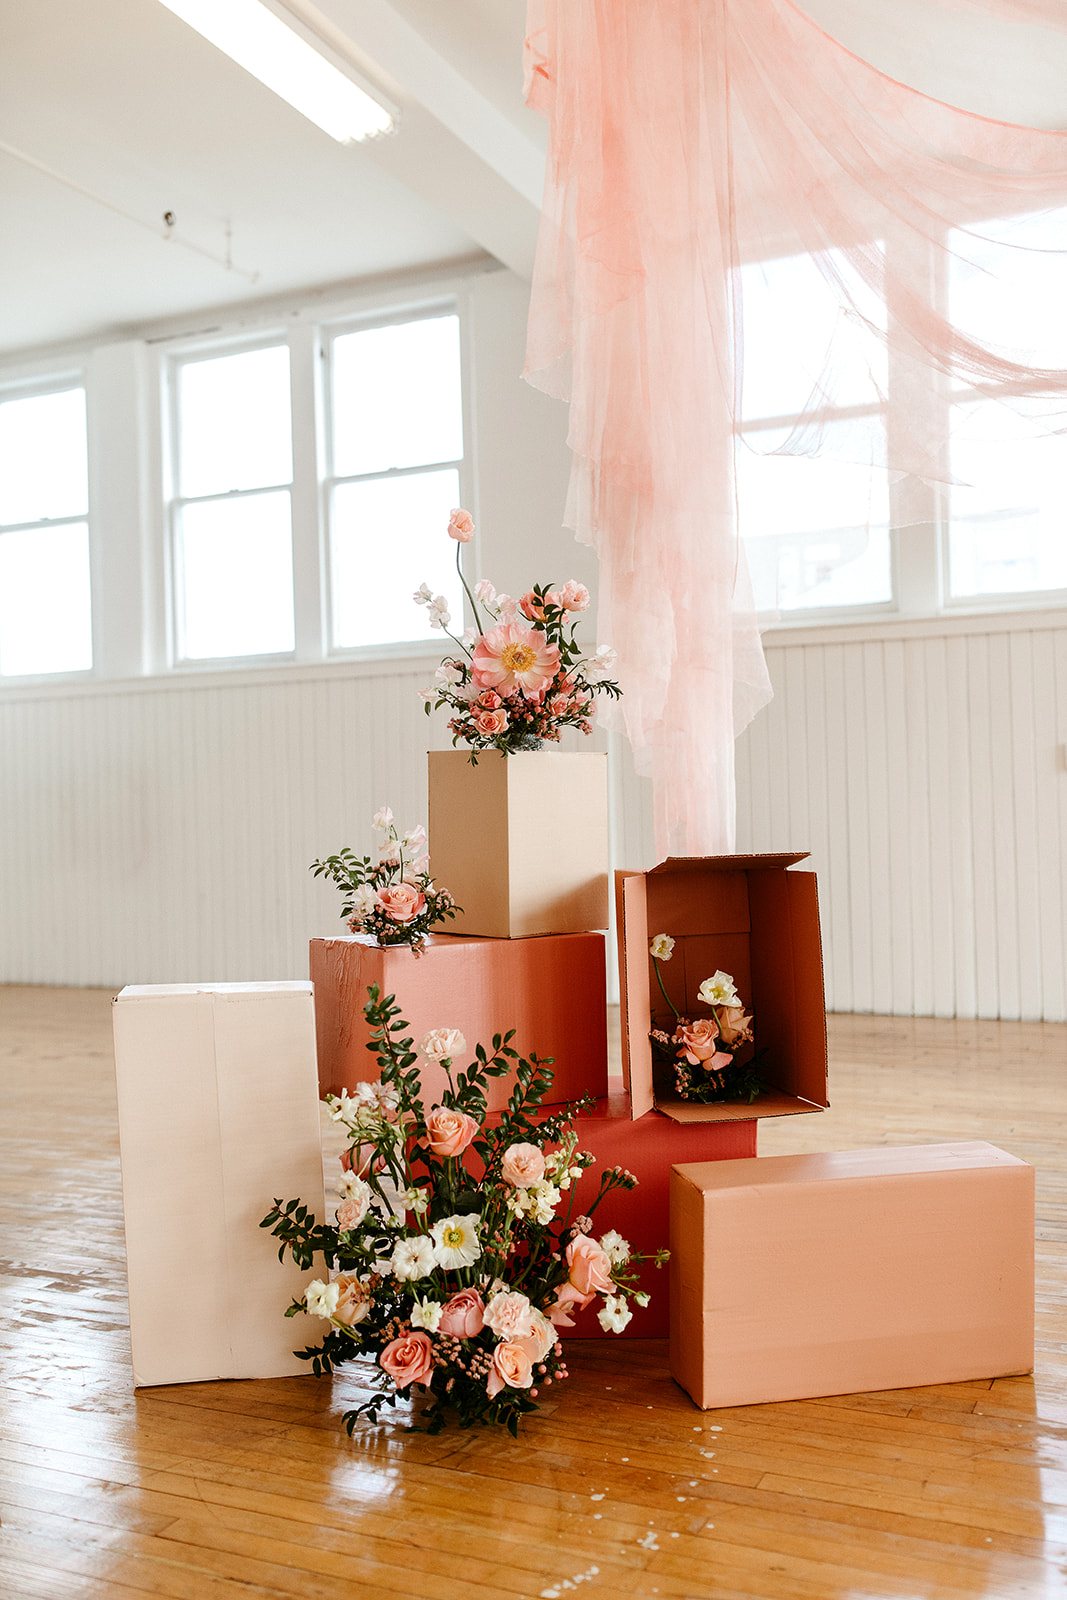 Unique DIY ceremony decor inspiration with painted cardboard boxes and a blush hanging fabric backdrop